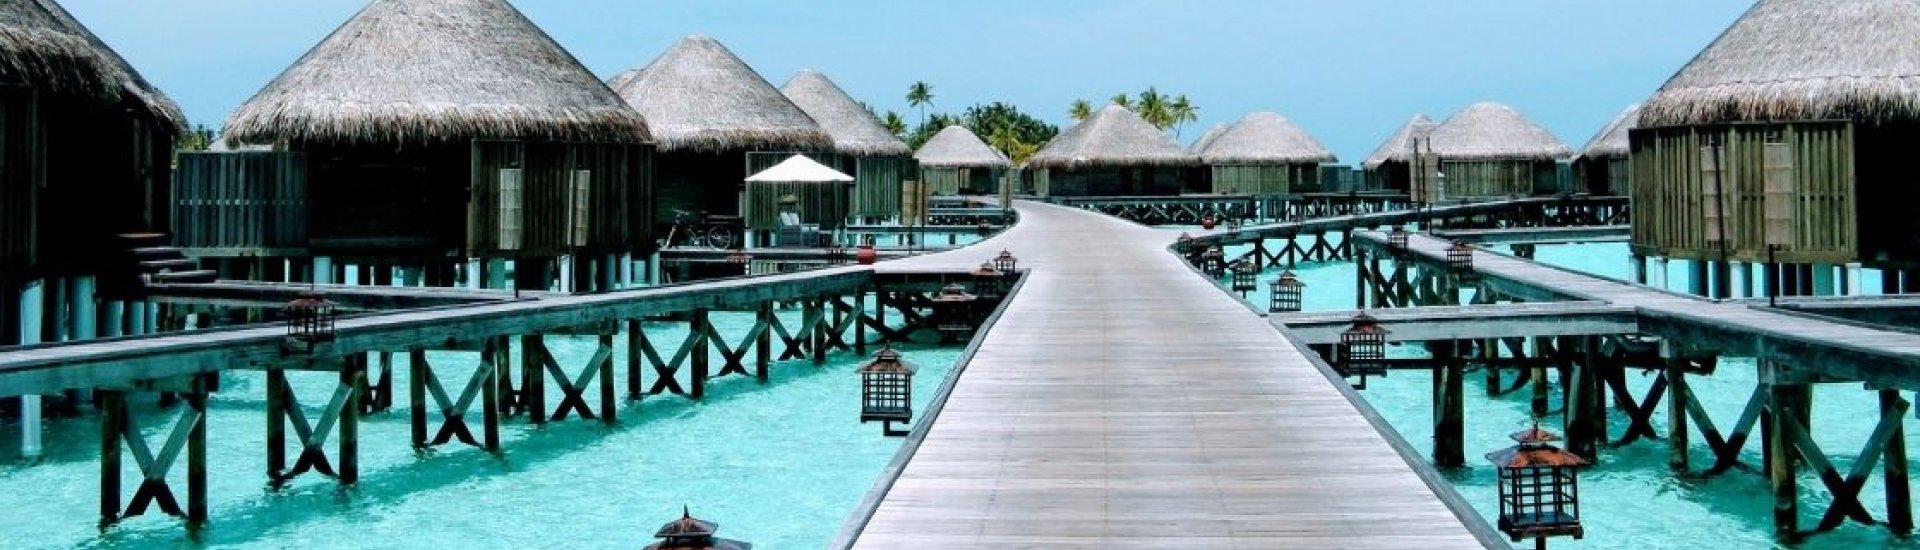 overwater bungalows of maldives 